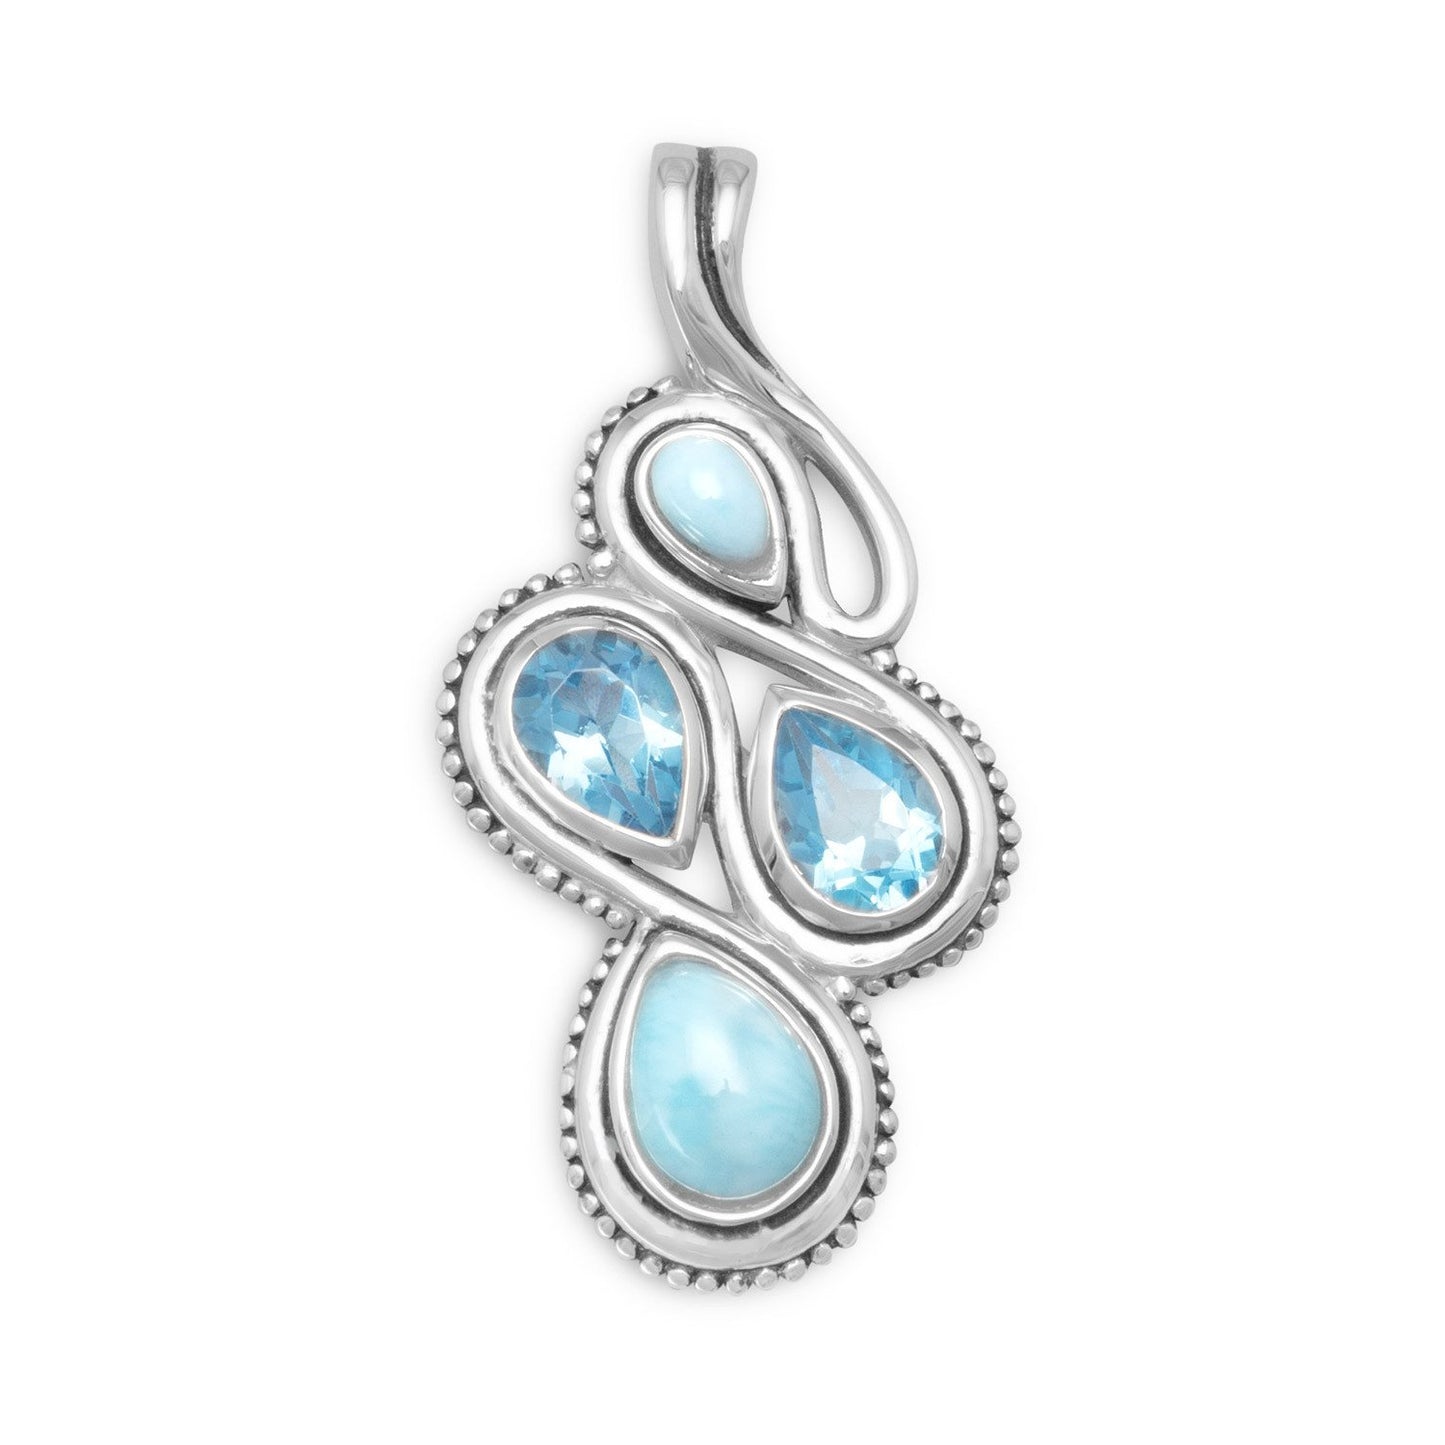 Oxidized Sterling Silver Blue Topaz and Larimar Figure 8 Slide Pendant with 1.5mm Box Chain